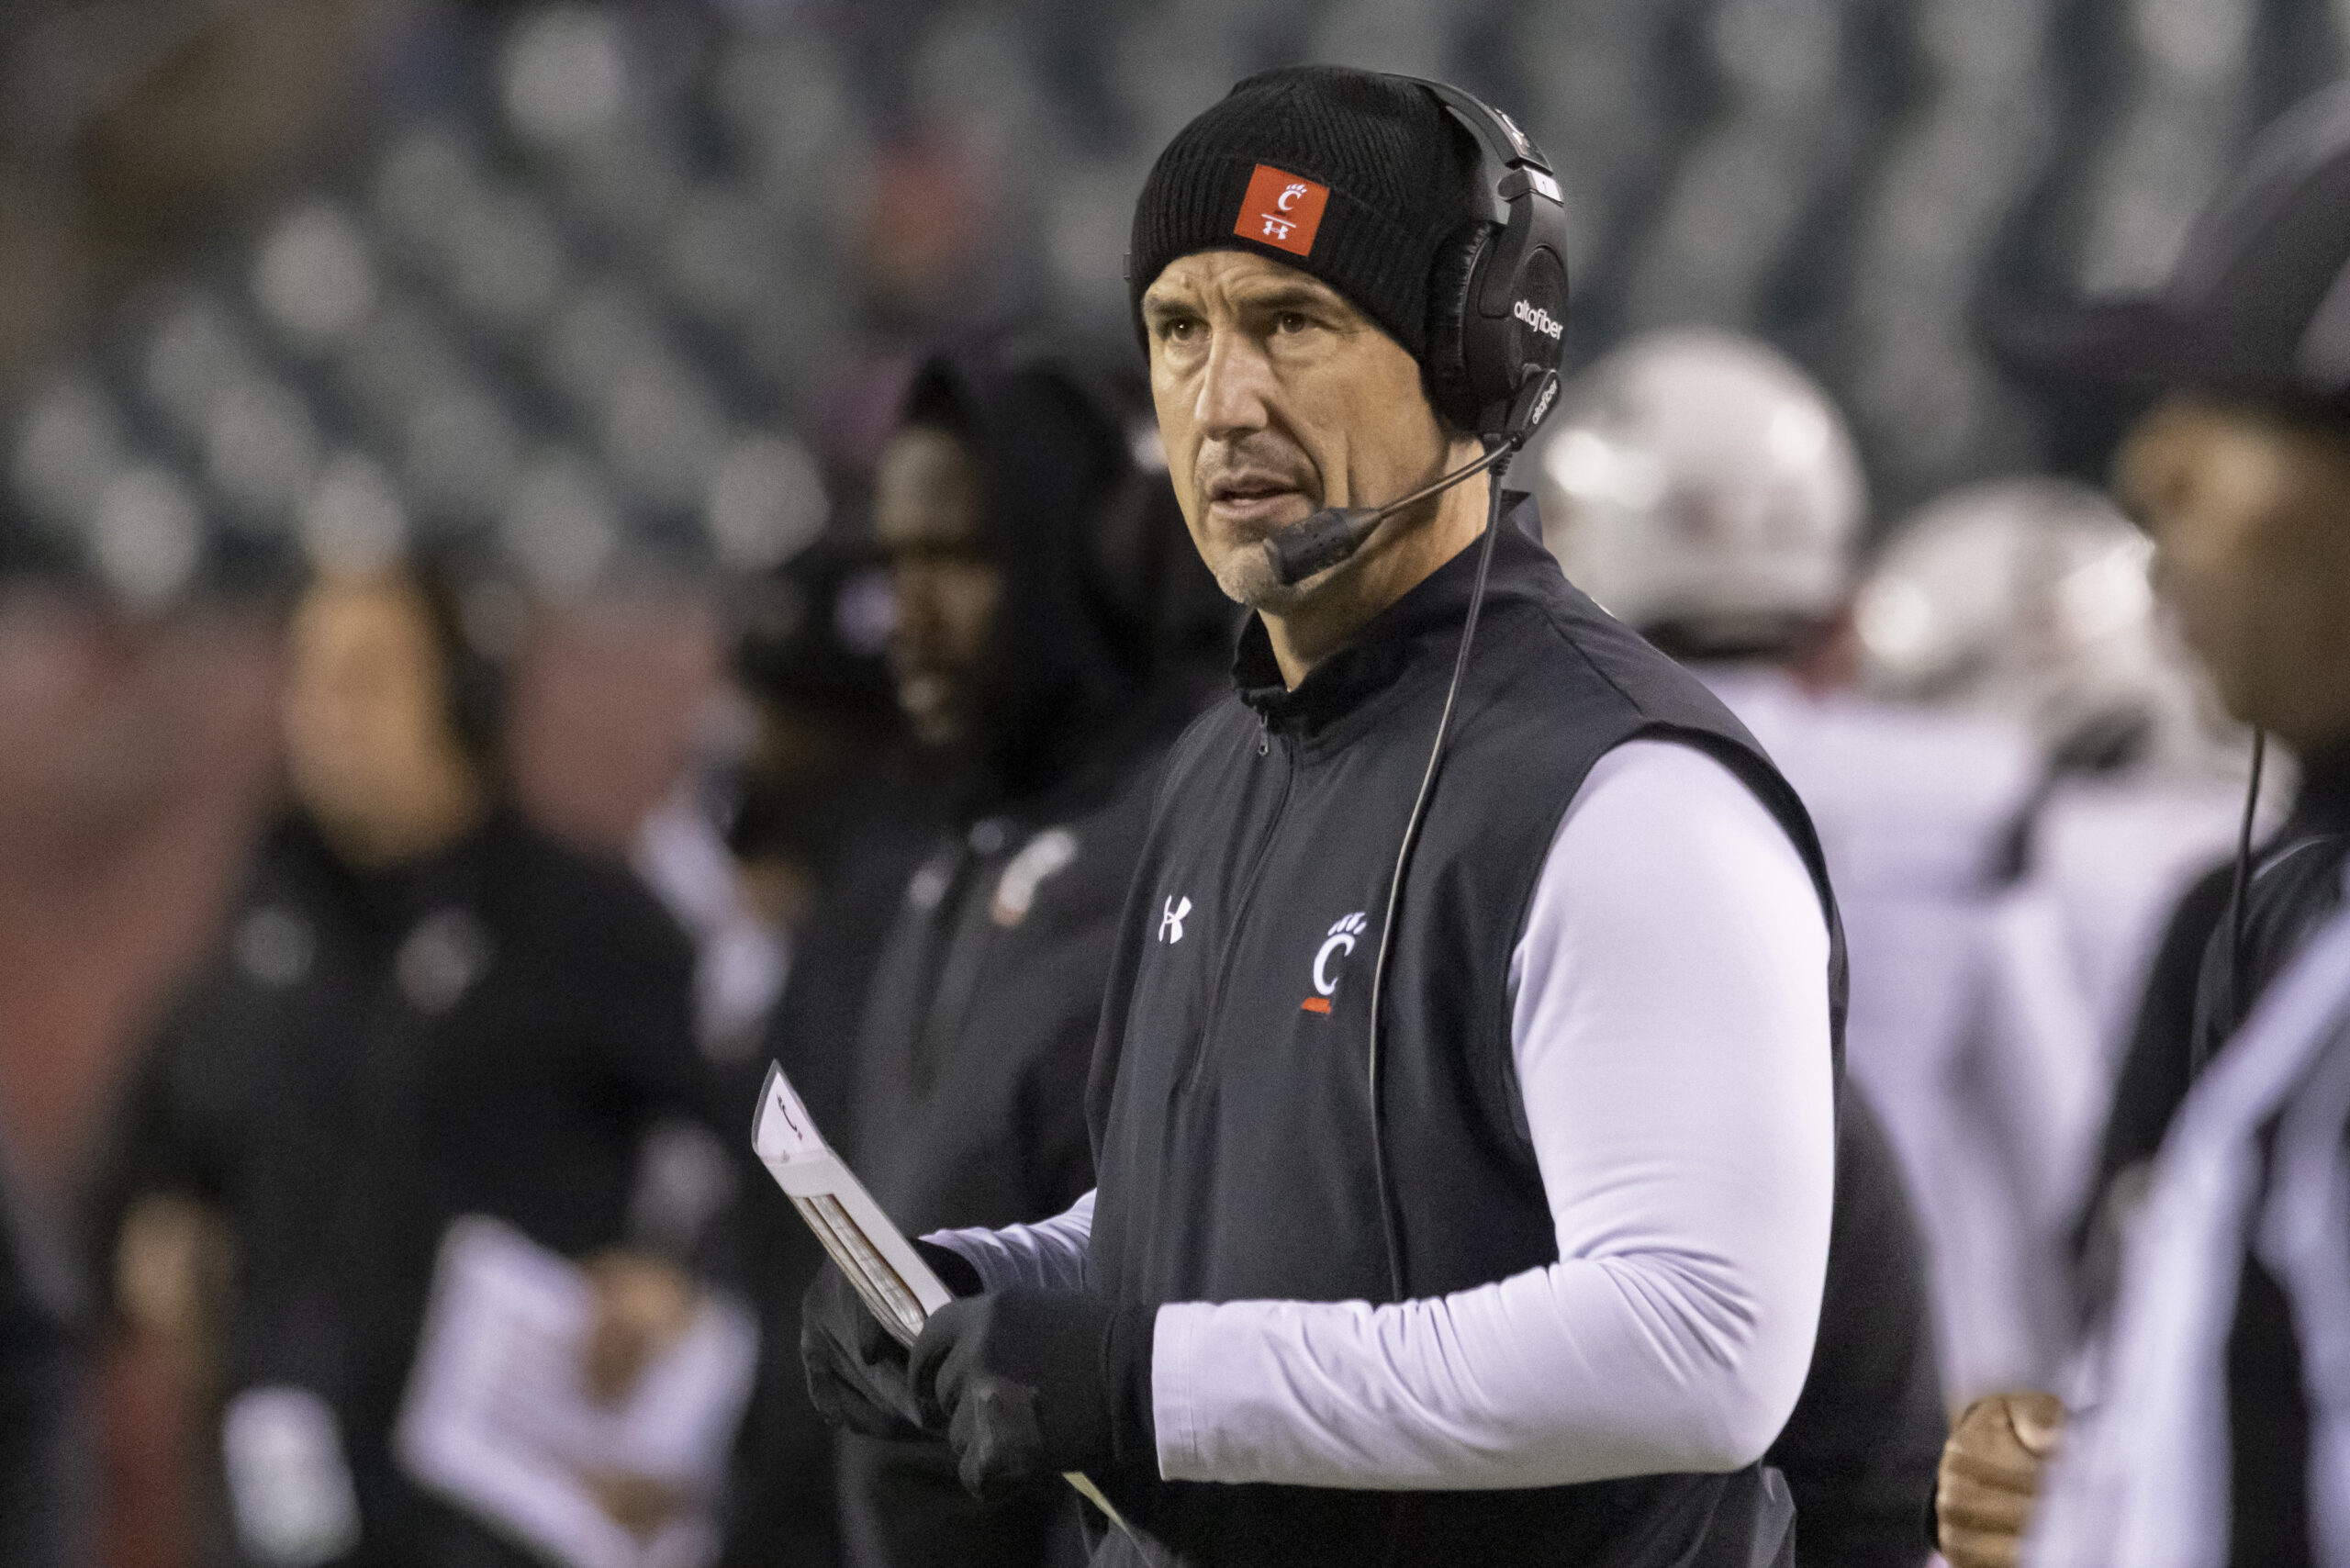 Luke Fickell hired as head coach of Badgers football